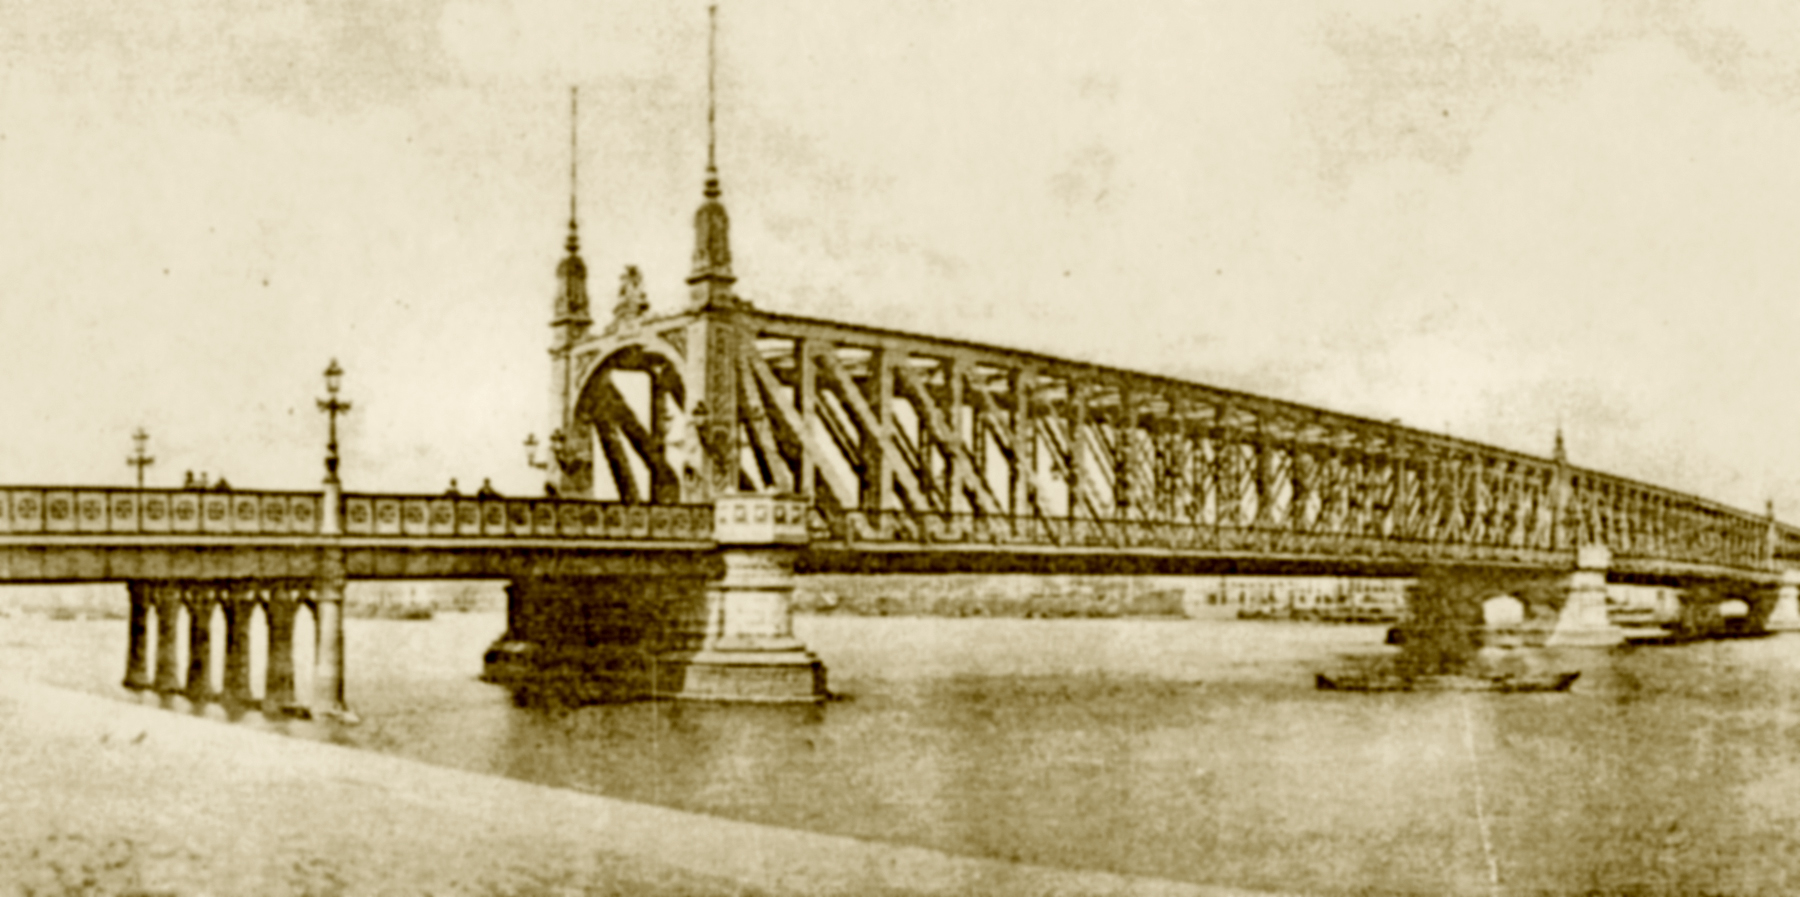 Willemsbrug shortly after its opening in 1878 as seen from Noordereiland wiki 01